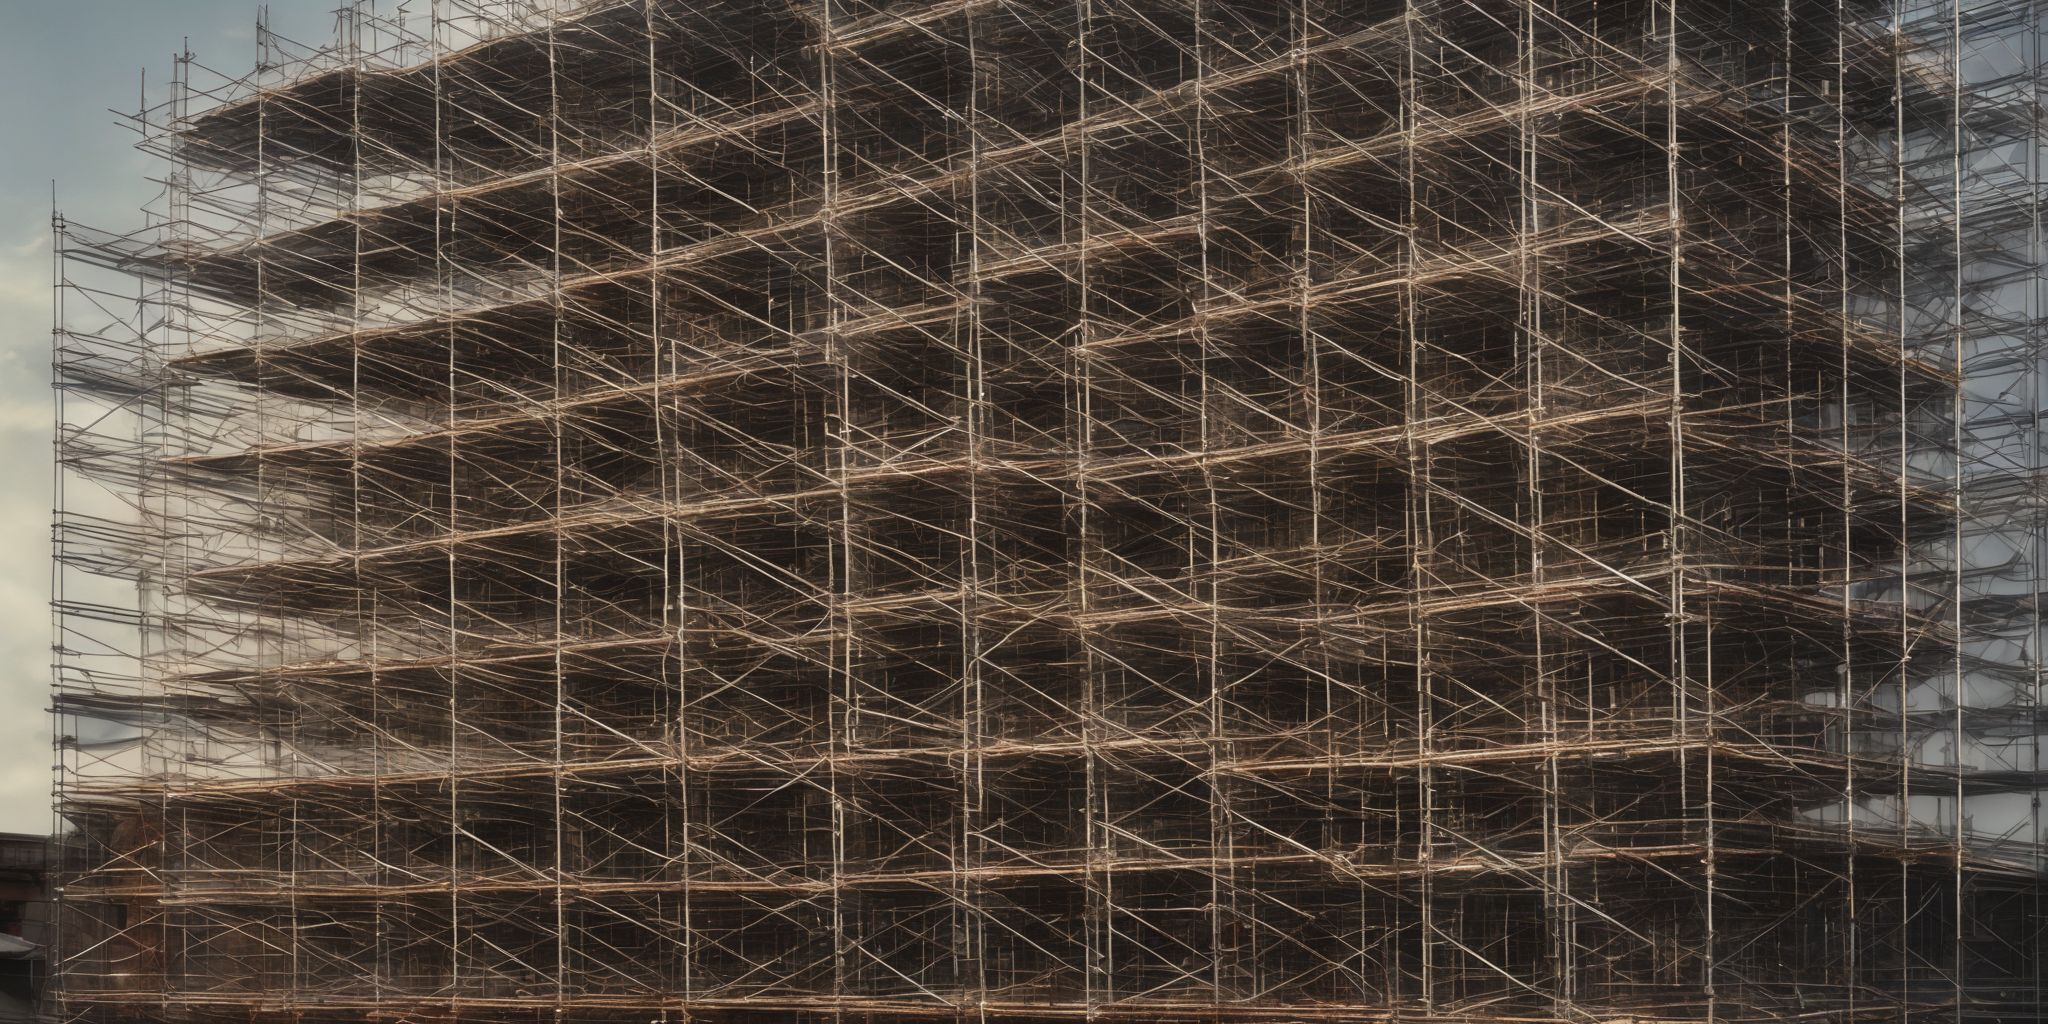 Scaffold  in realistic, photographic style